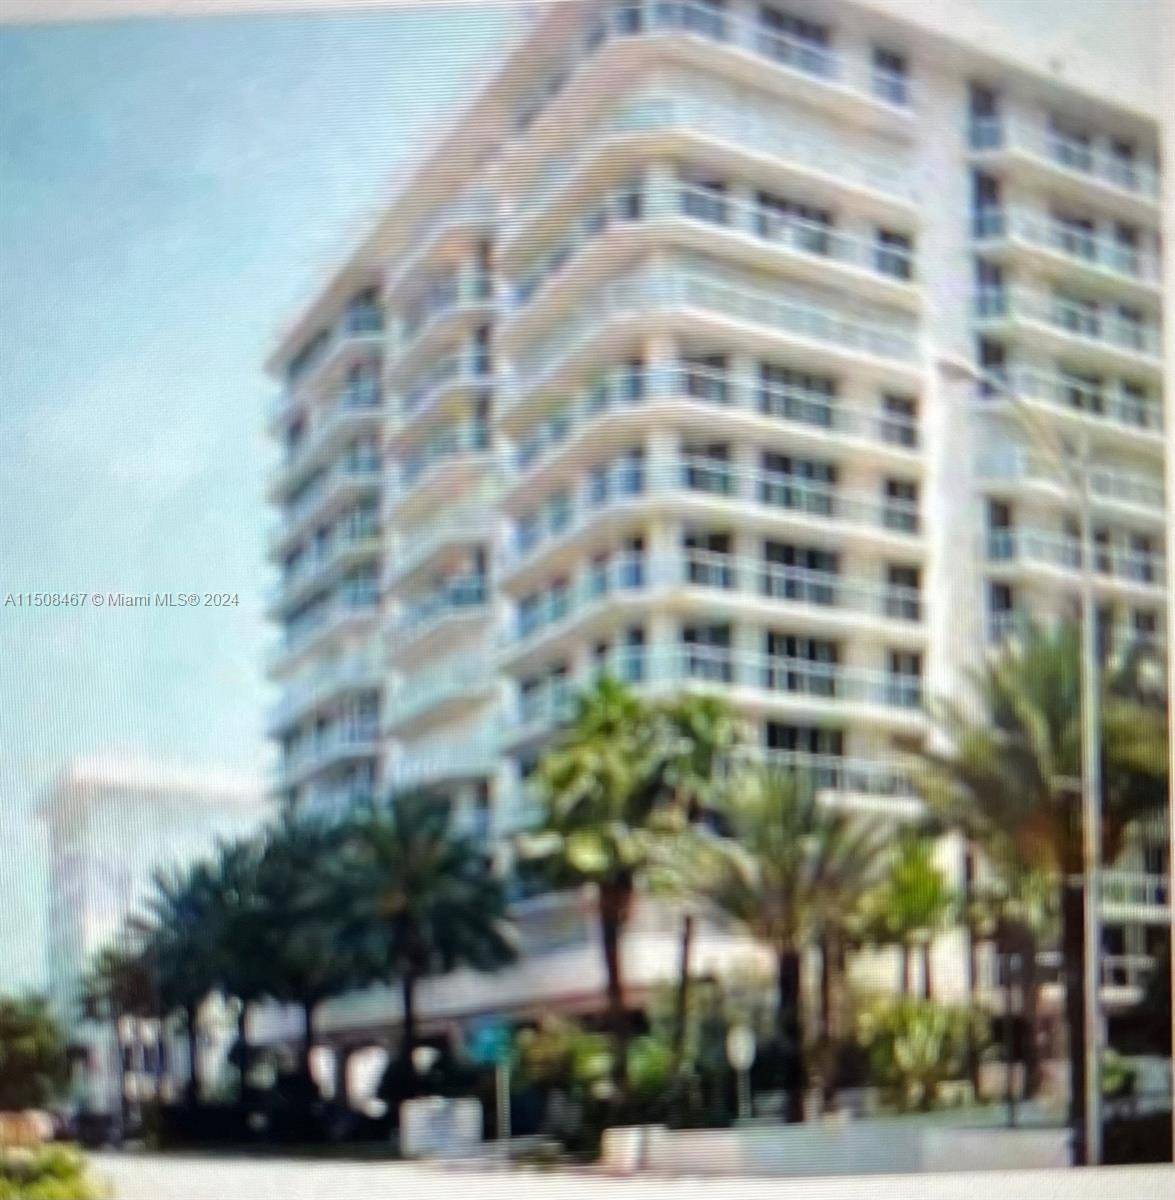 FIRST TIME ON THE MKT, MIRAGE CONDOMINIUM DIRECT OCEAN BUILDING, 2 BED 2 BATH, ALL AMENITIES, WALK DISTANCE TO BAL HARBOUR MALL, SHOPS, RESTAURANTS.